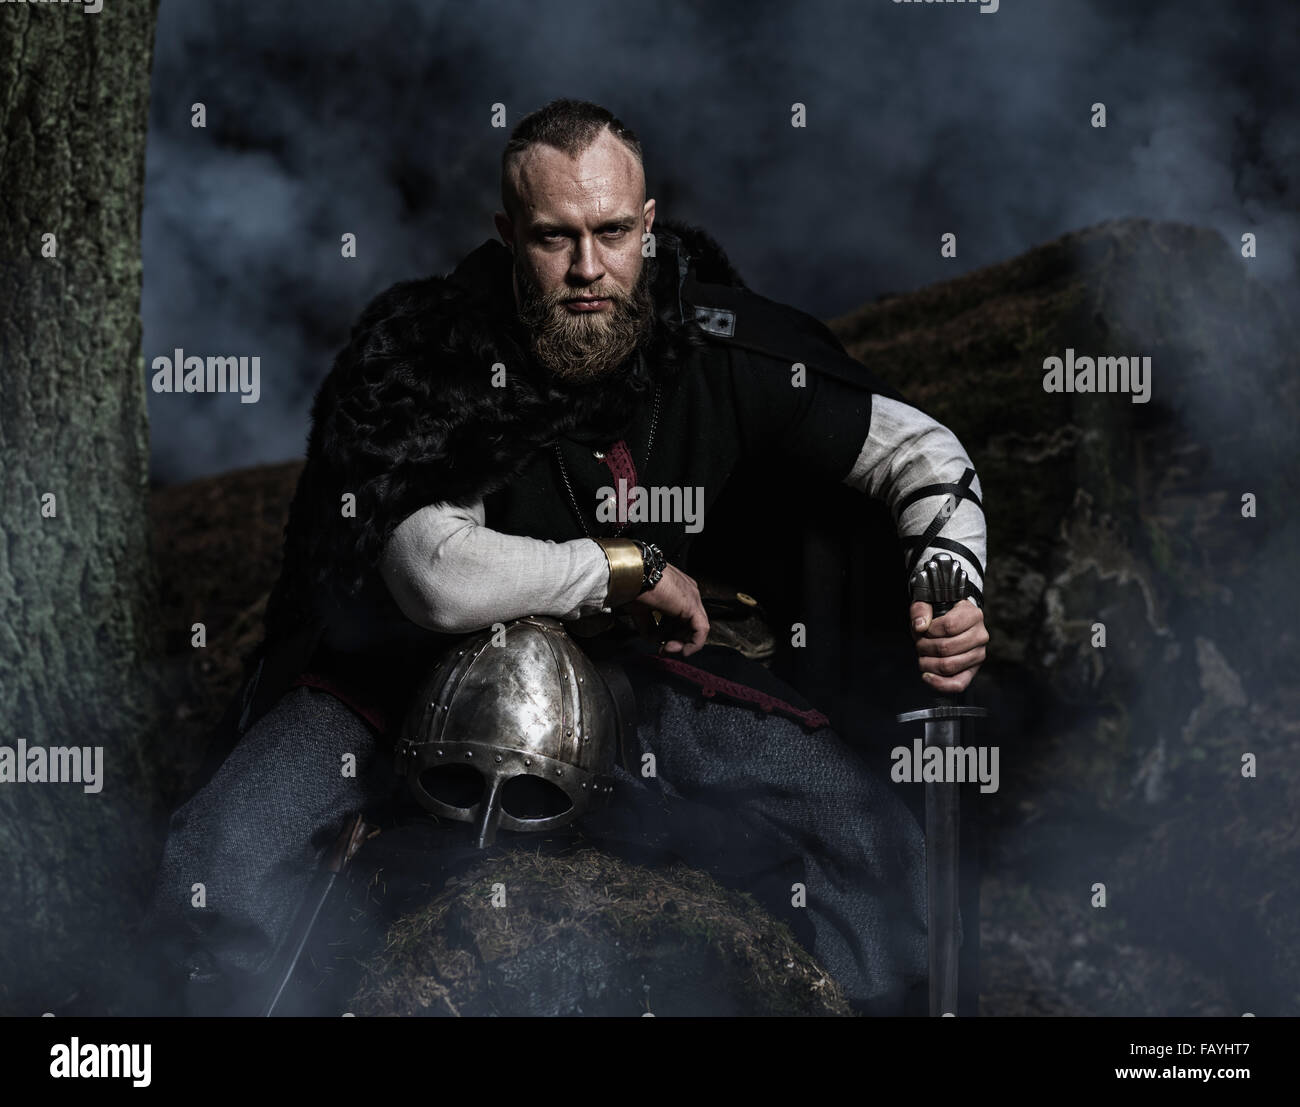 Viking with sword and helmet on a background of smoky forest. Warrior resting. Historic costume. Stock Photo